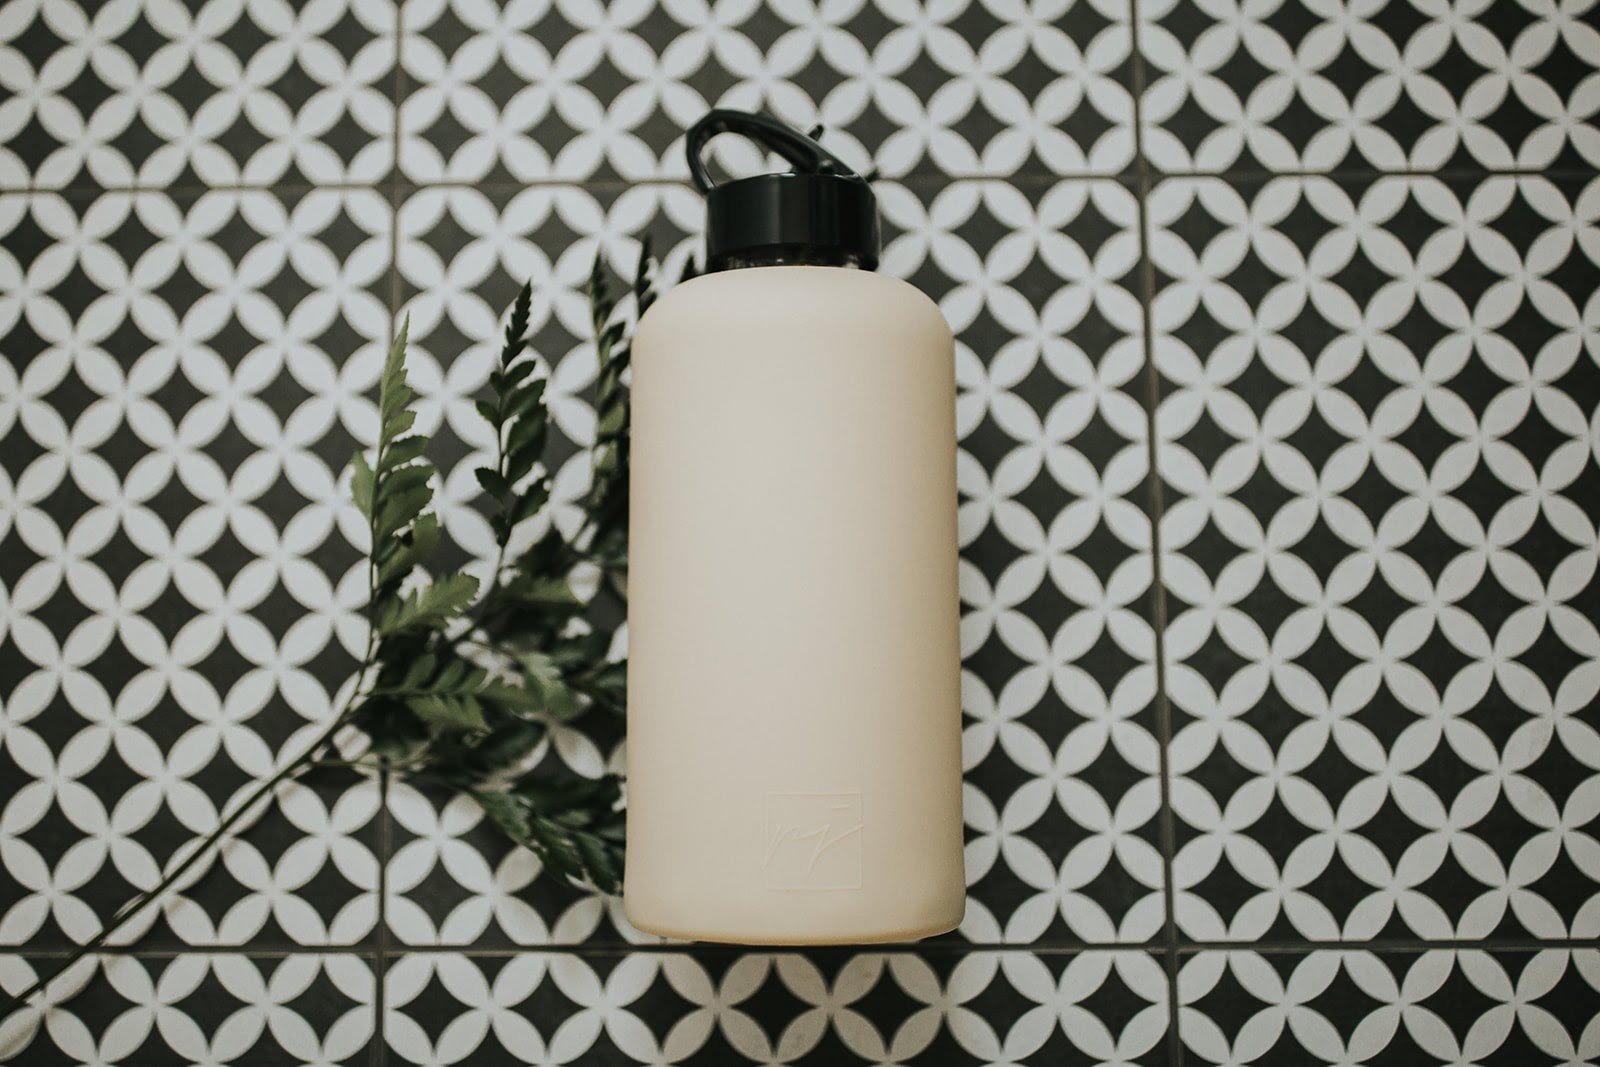 One litre glass water bottle with nude, sand coloured protective silicone sleeve and high gloss black folding straw lid. On a black and white tiled background with green foliage - lifewithPandJ